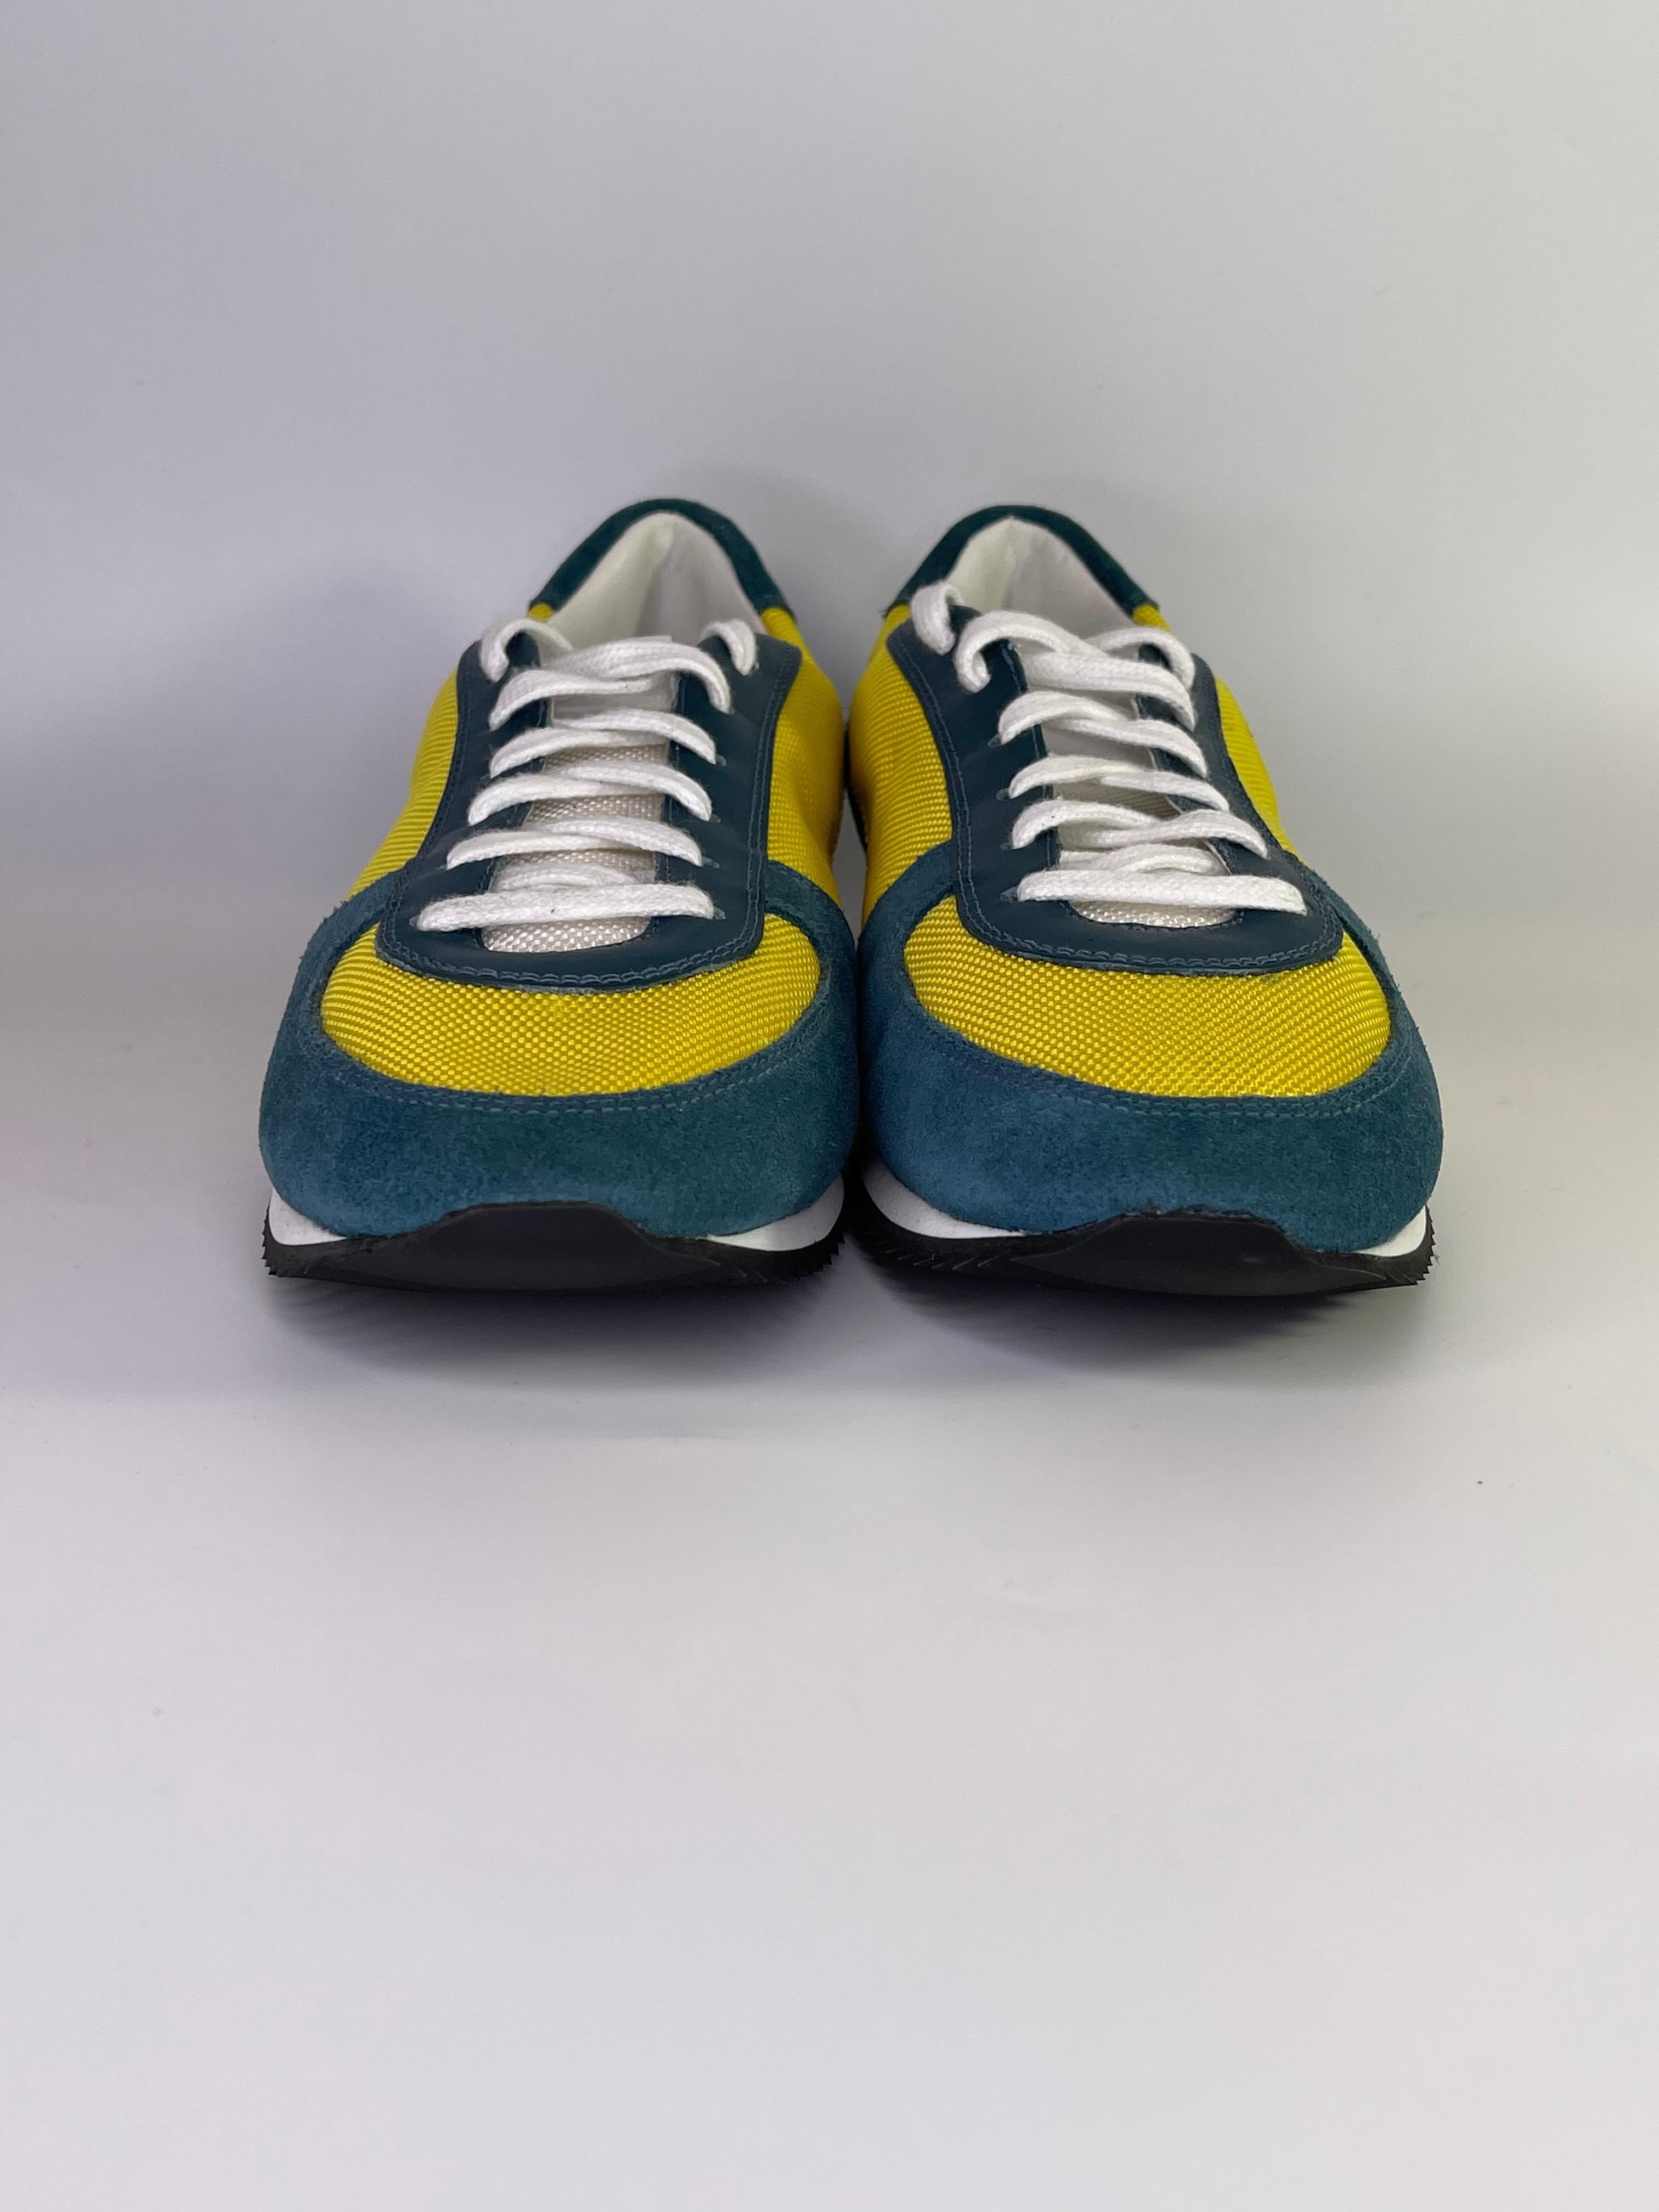 These Burberry runners feature University of Michigan colors blue and yellow. Perfect for Ann Arbor Students! They are made with yellow nylon and blue suede with contrasting white shoe laces. 

**Burberry shoes run small, so you may want 1/2 size